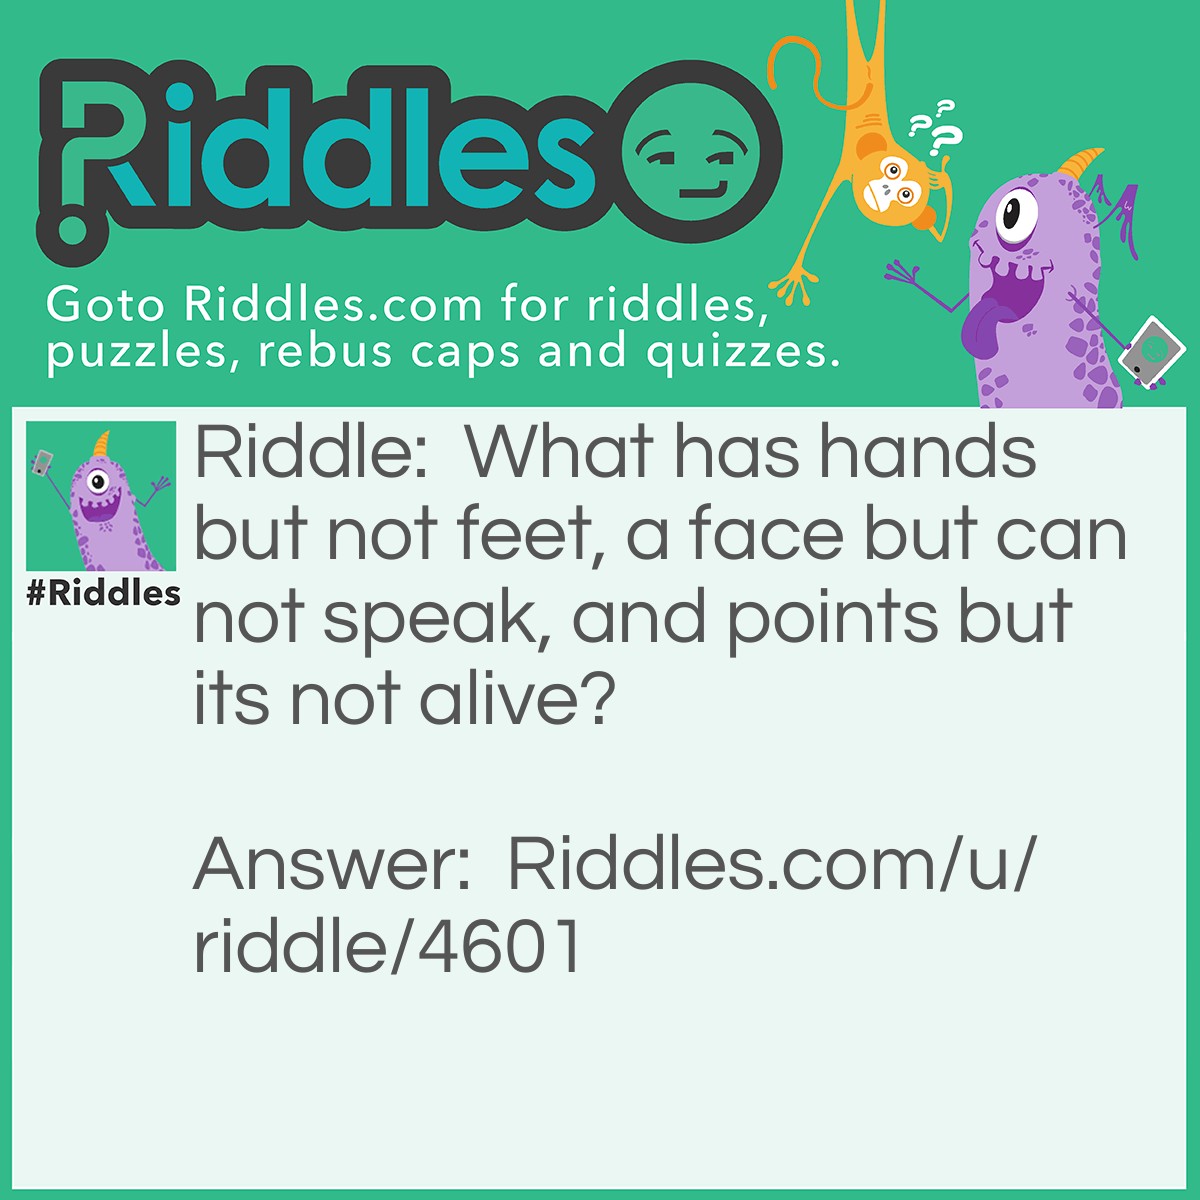 Riddle: What has hands but not feet, a face but can not speak, and points but its not alive? Answer: A clock/watch/compass.